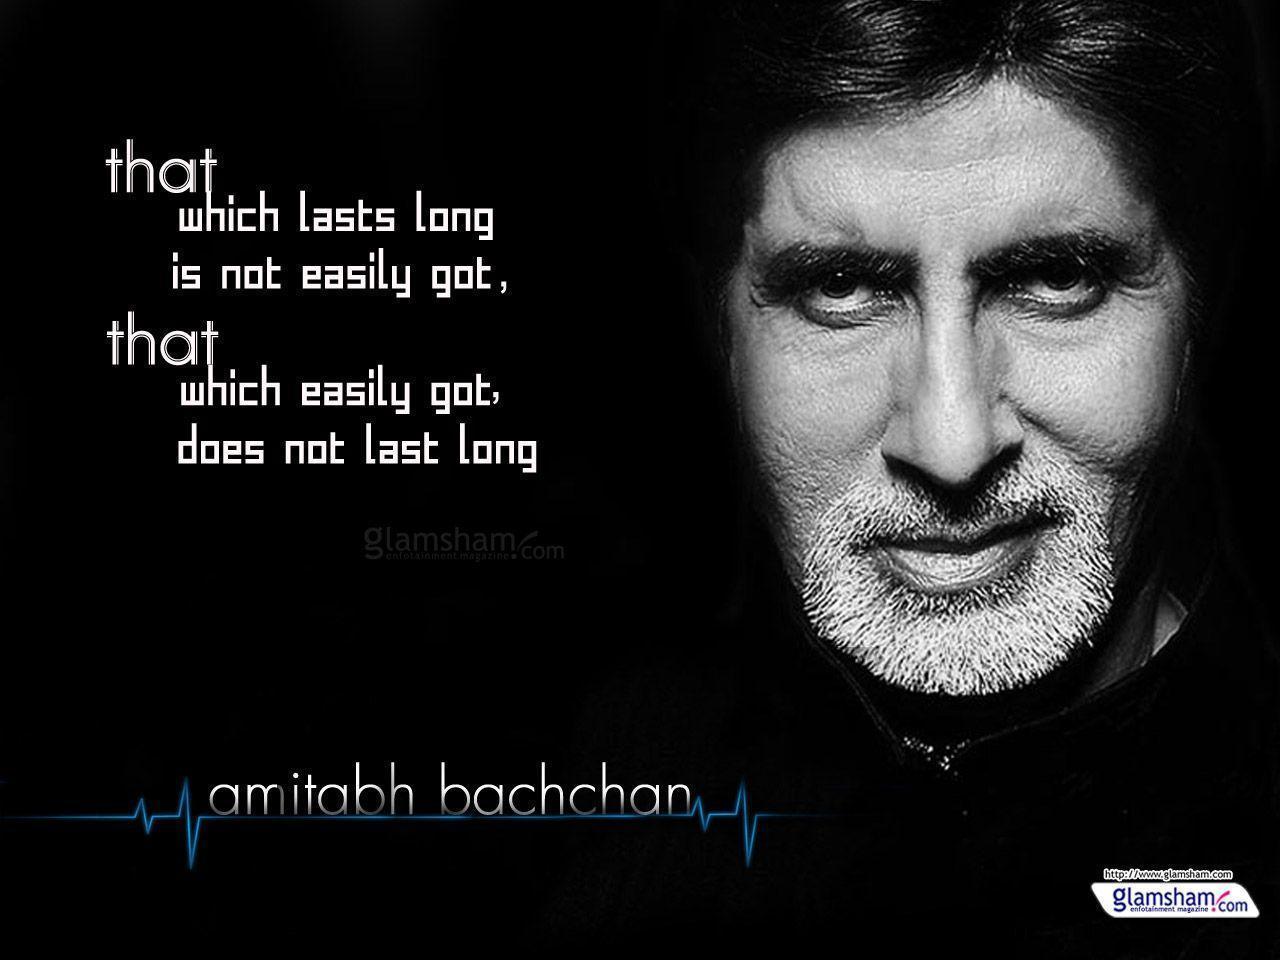 Celebrity Quotes and Movie Dialogues wallpaper